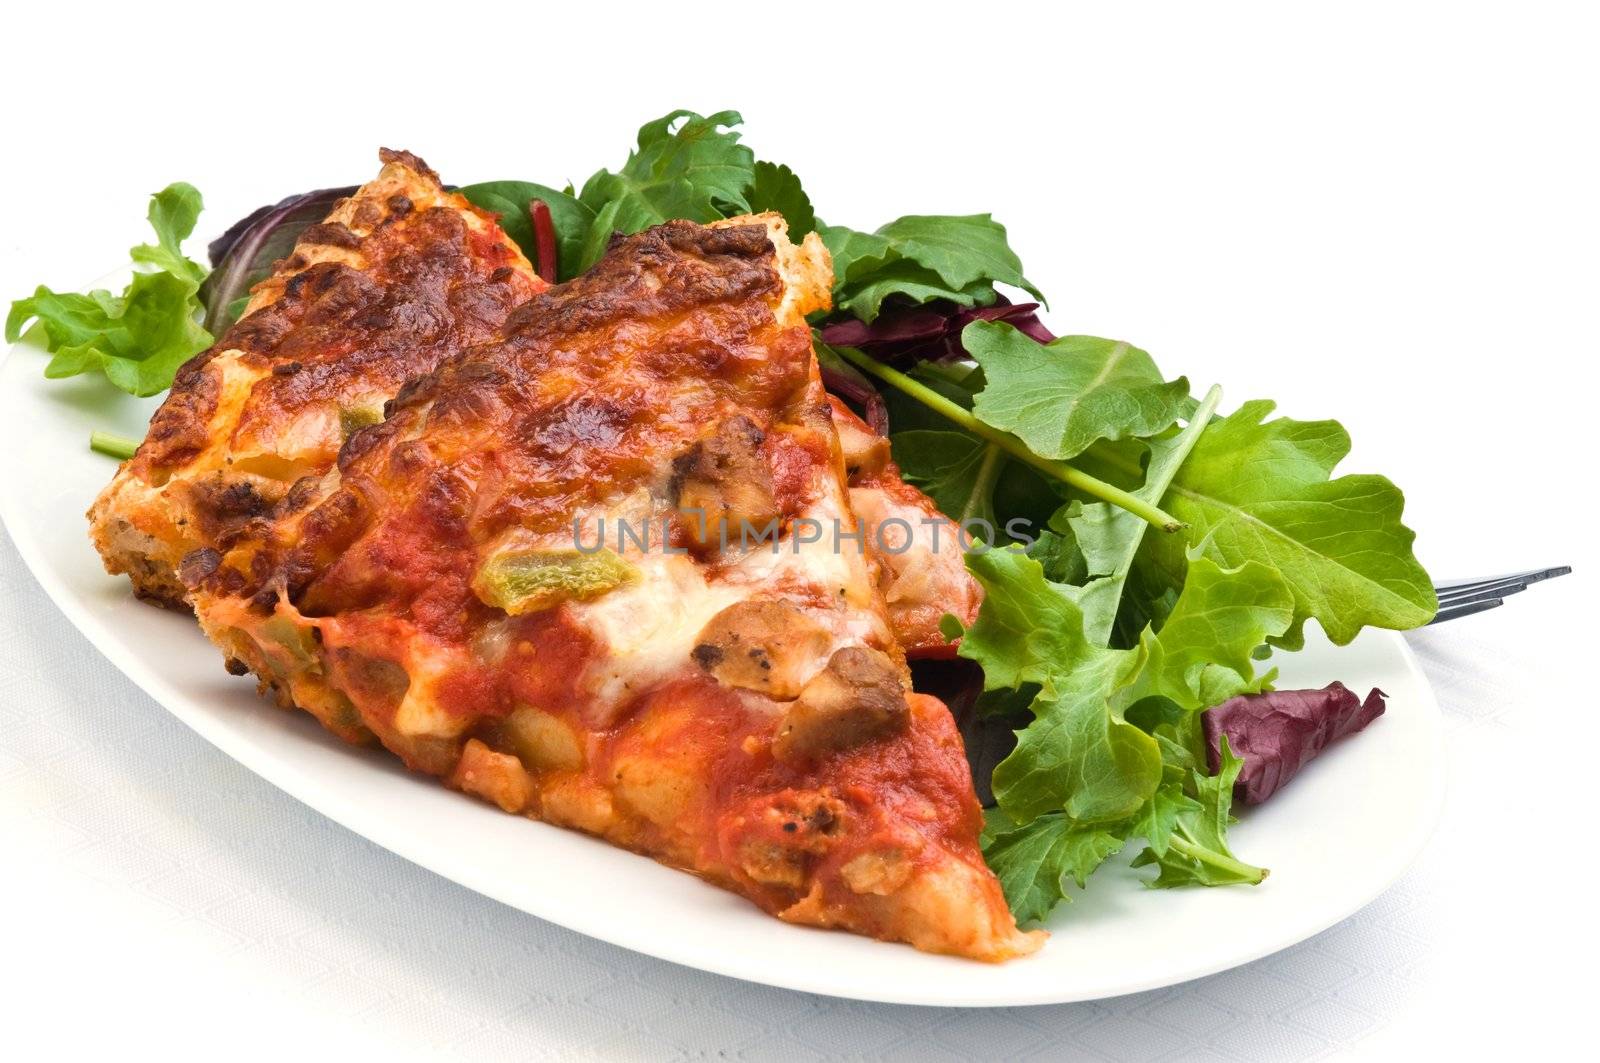 Delicious homemade pizza served with mixed greens.